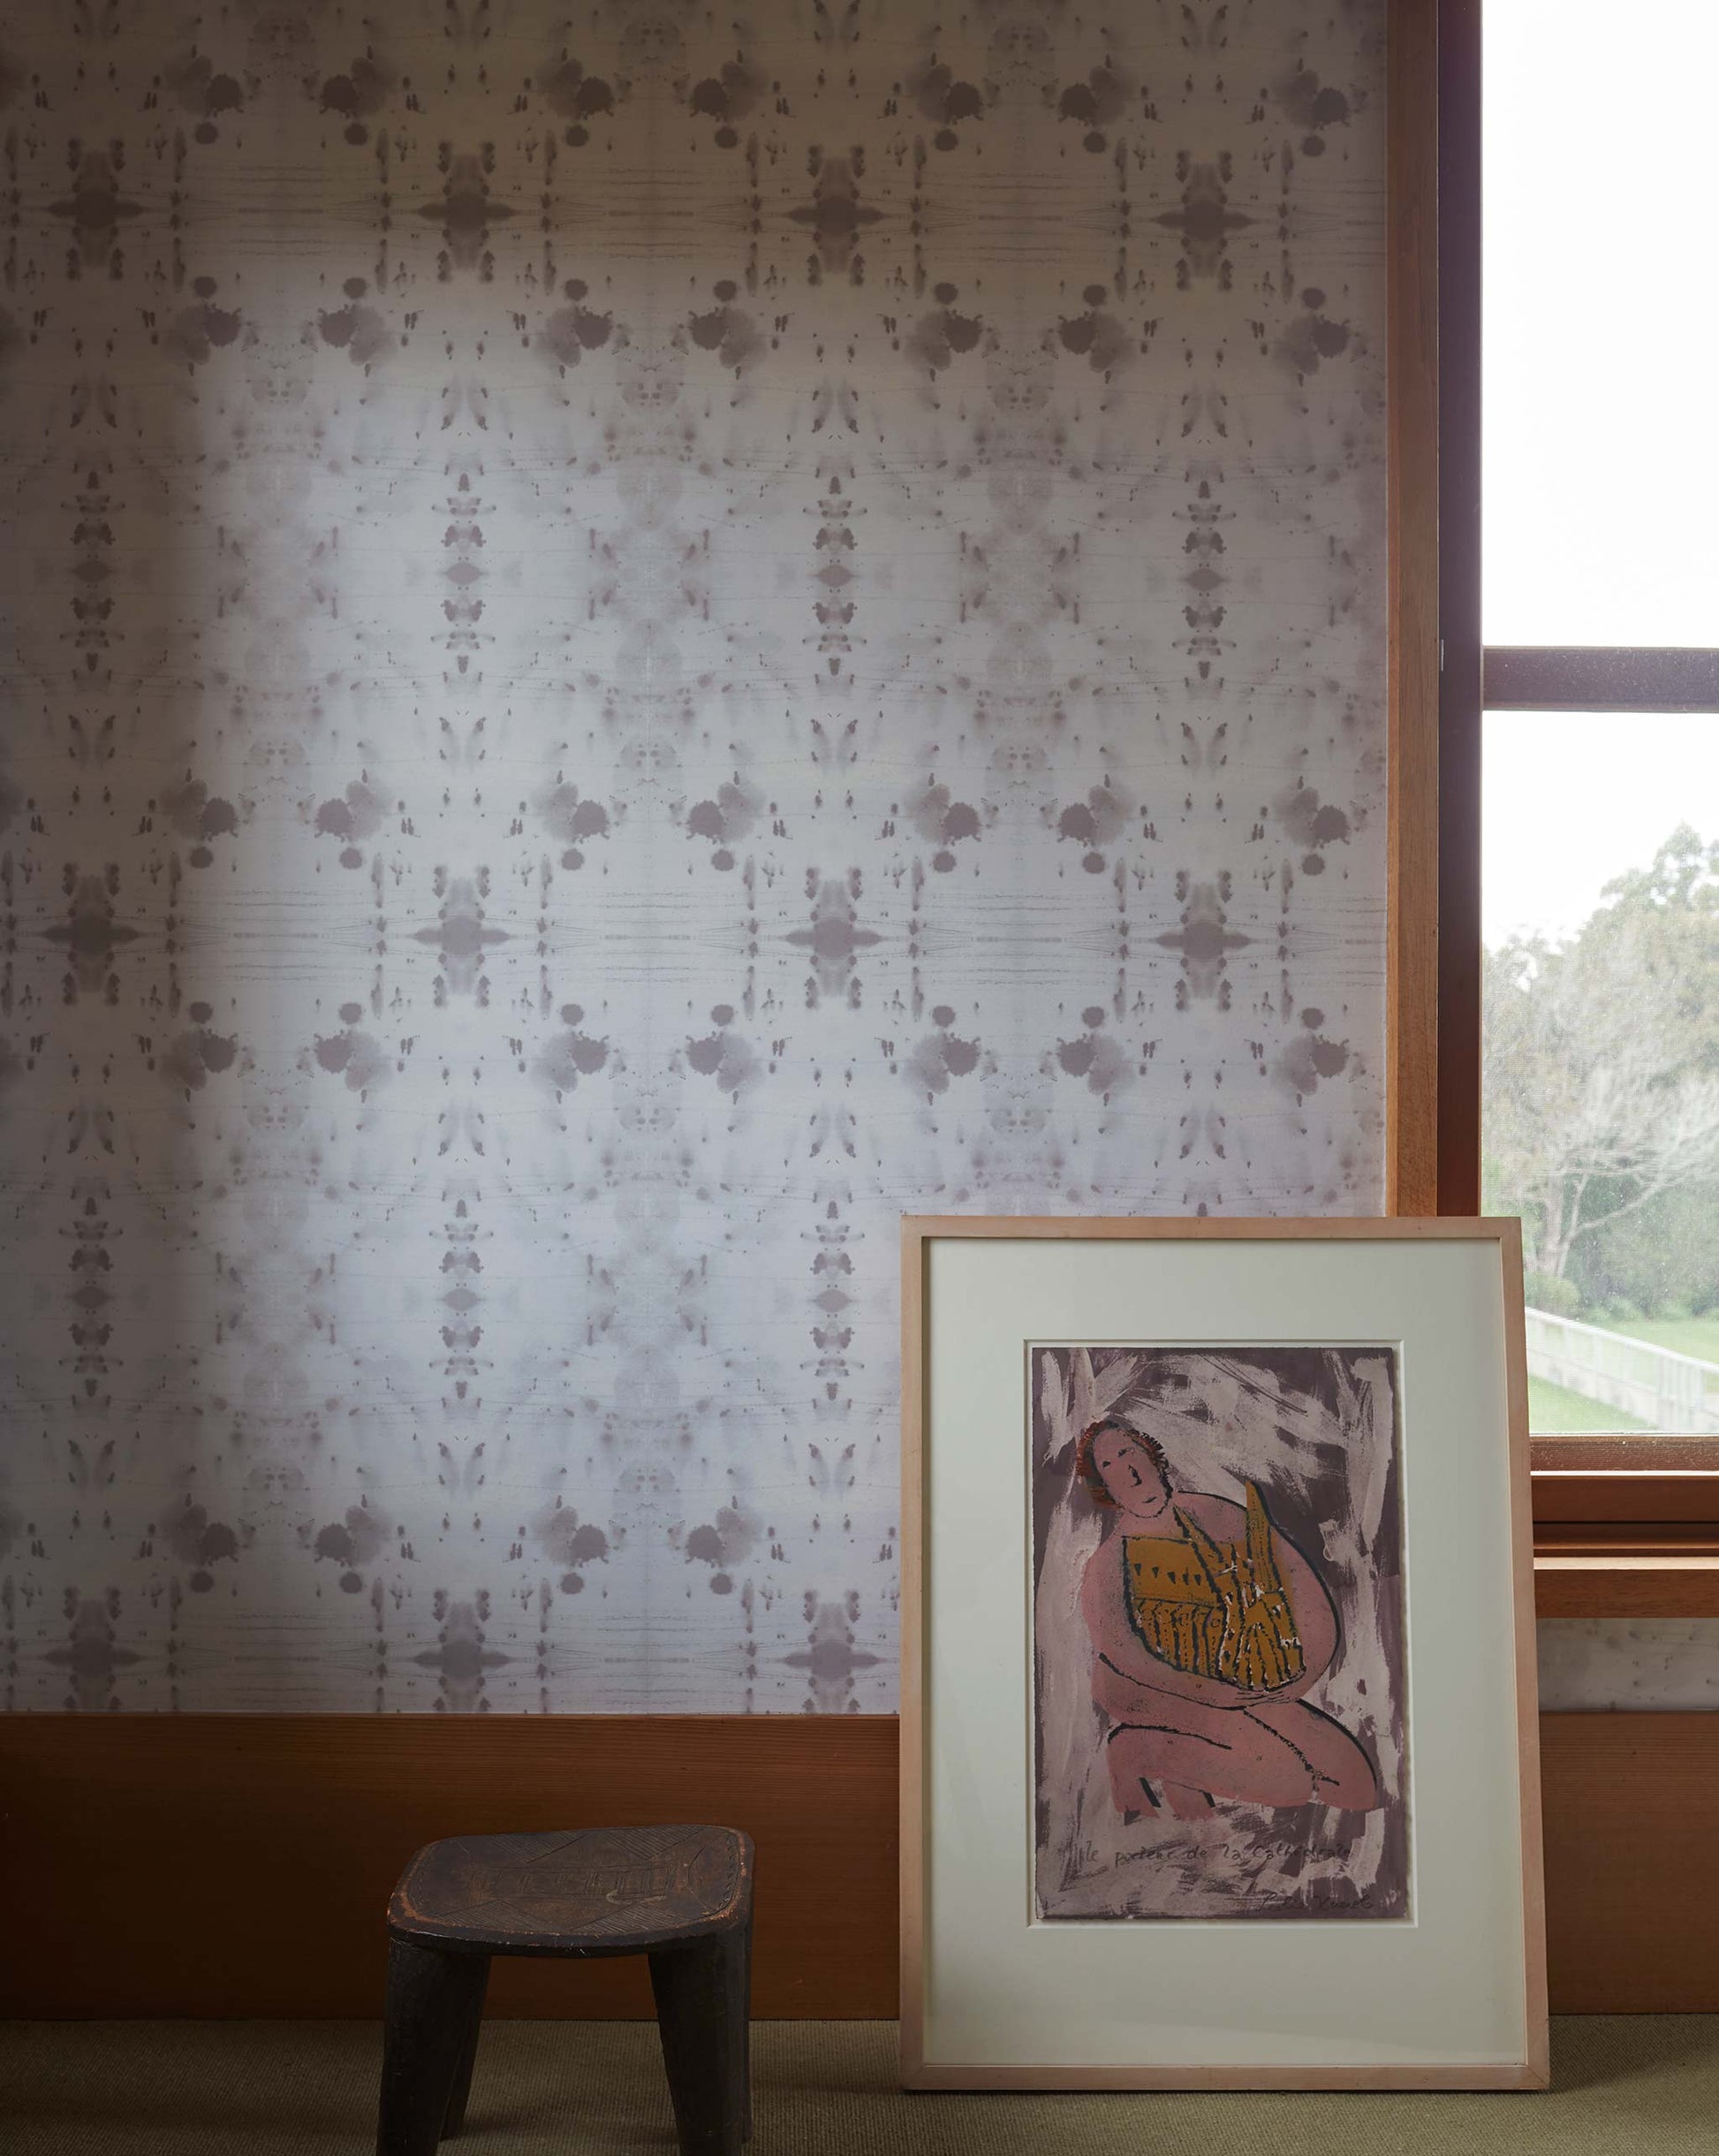 Eskayel's Nairutya Wallpaper in the colorway Chalk installed in a room with a wooden stool and framed artwork.